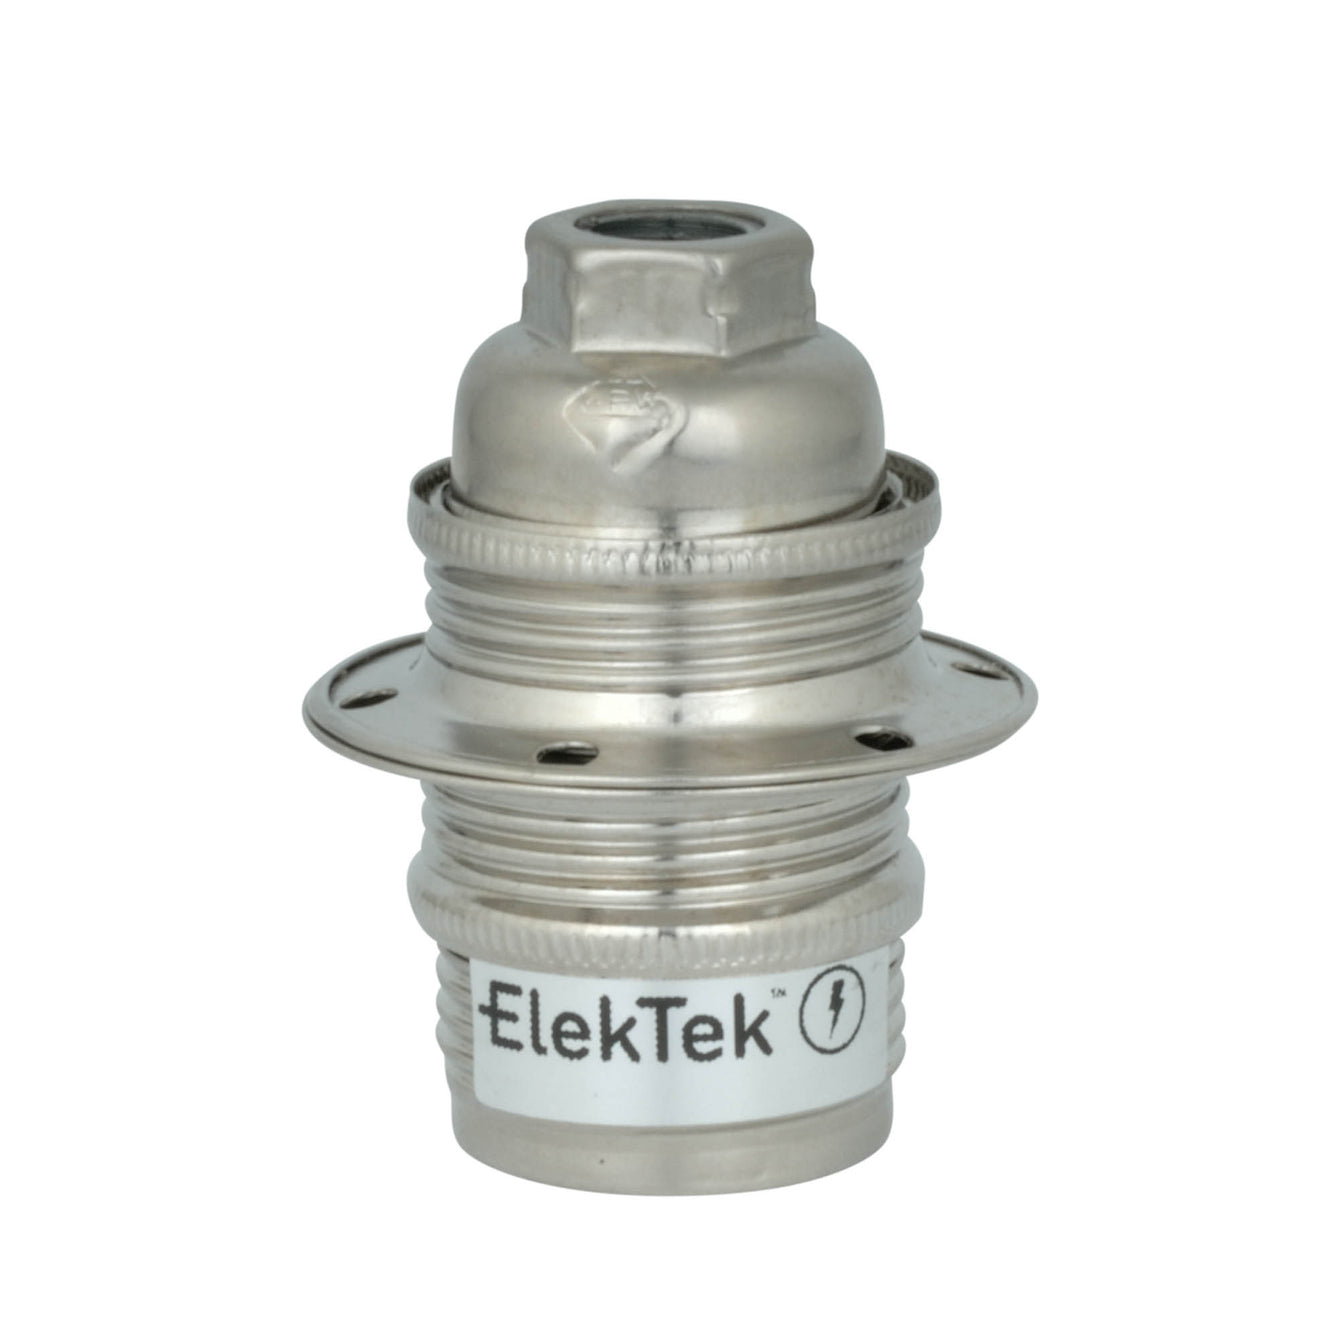 ElekTek SES E14 Lamp Holder 10mm Entry Small Edison Screw Earthed With Shade Rings Cord Grip Brass - Buy It Better 